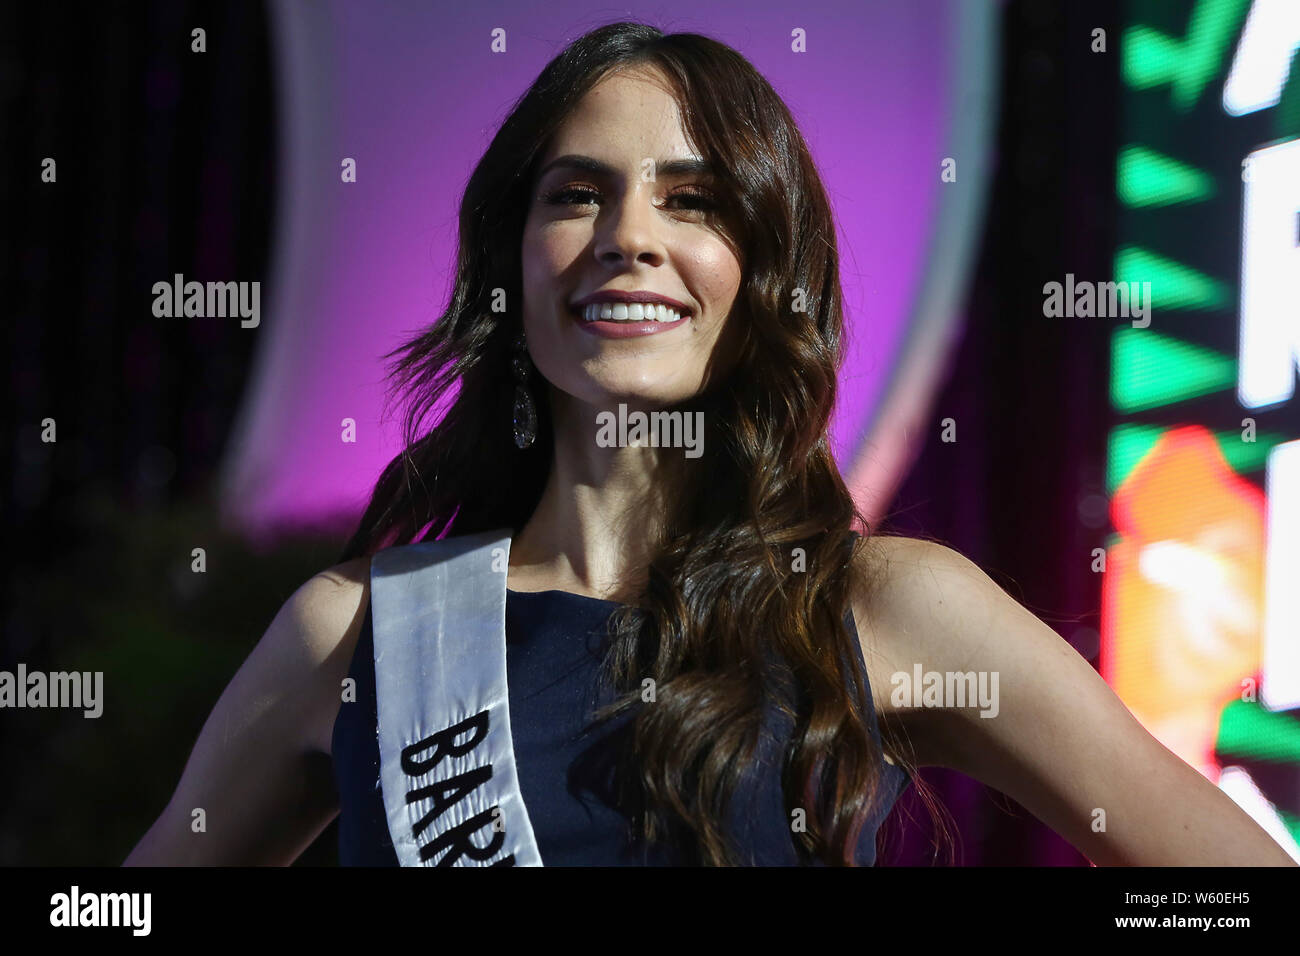 Caracas, Venezuela. 30th July, 2019. Liliana Goncalvez from Barinas takes part in a presentation of the candidates for this year's Miss Venezuela election. The election will take place on 1 August. Venezuela is experiencing a severe economic crisis. The situation is also critical politically. Since the beginning of the year, Head of State Maduro and Parliament President Guaido have been engaged in a power struggle, while the country has to contend with massive power cuts. Credit: Pedro Ramses Mattey/dpa/Alamy Live News Stock Photo